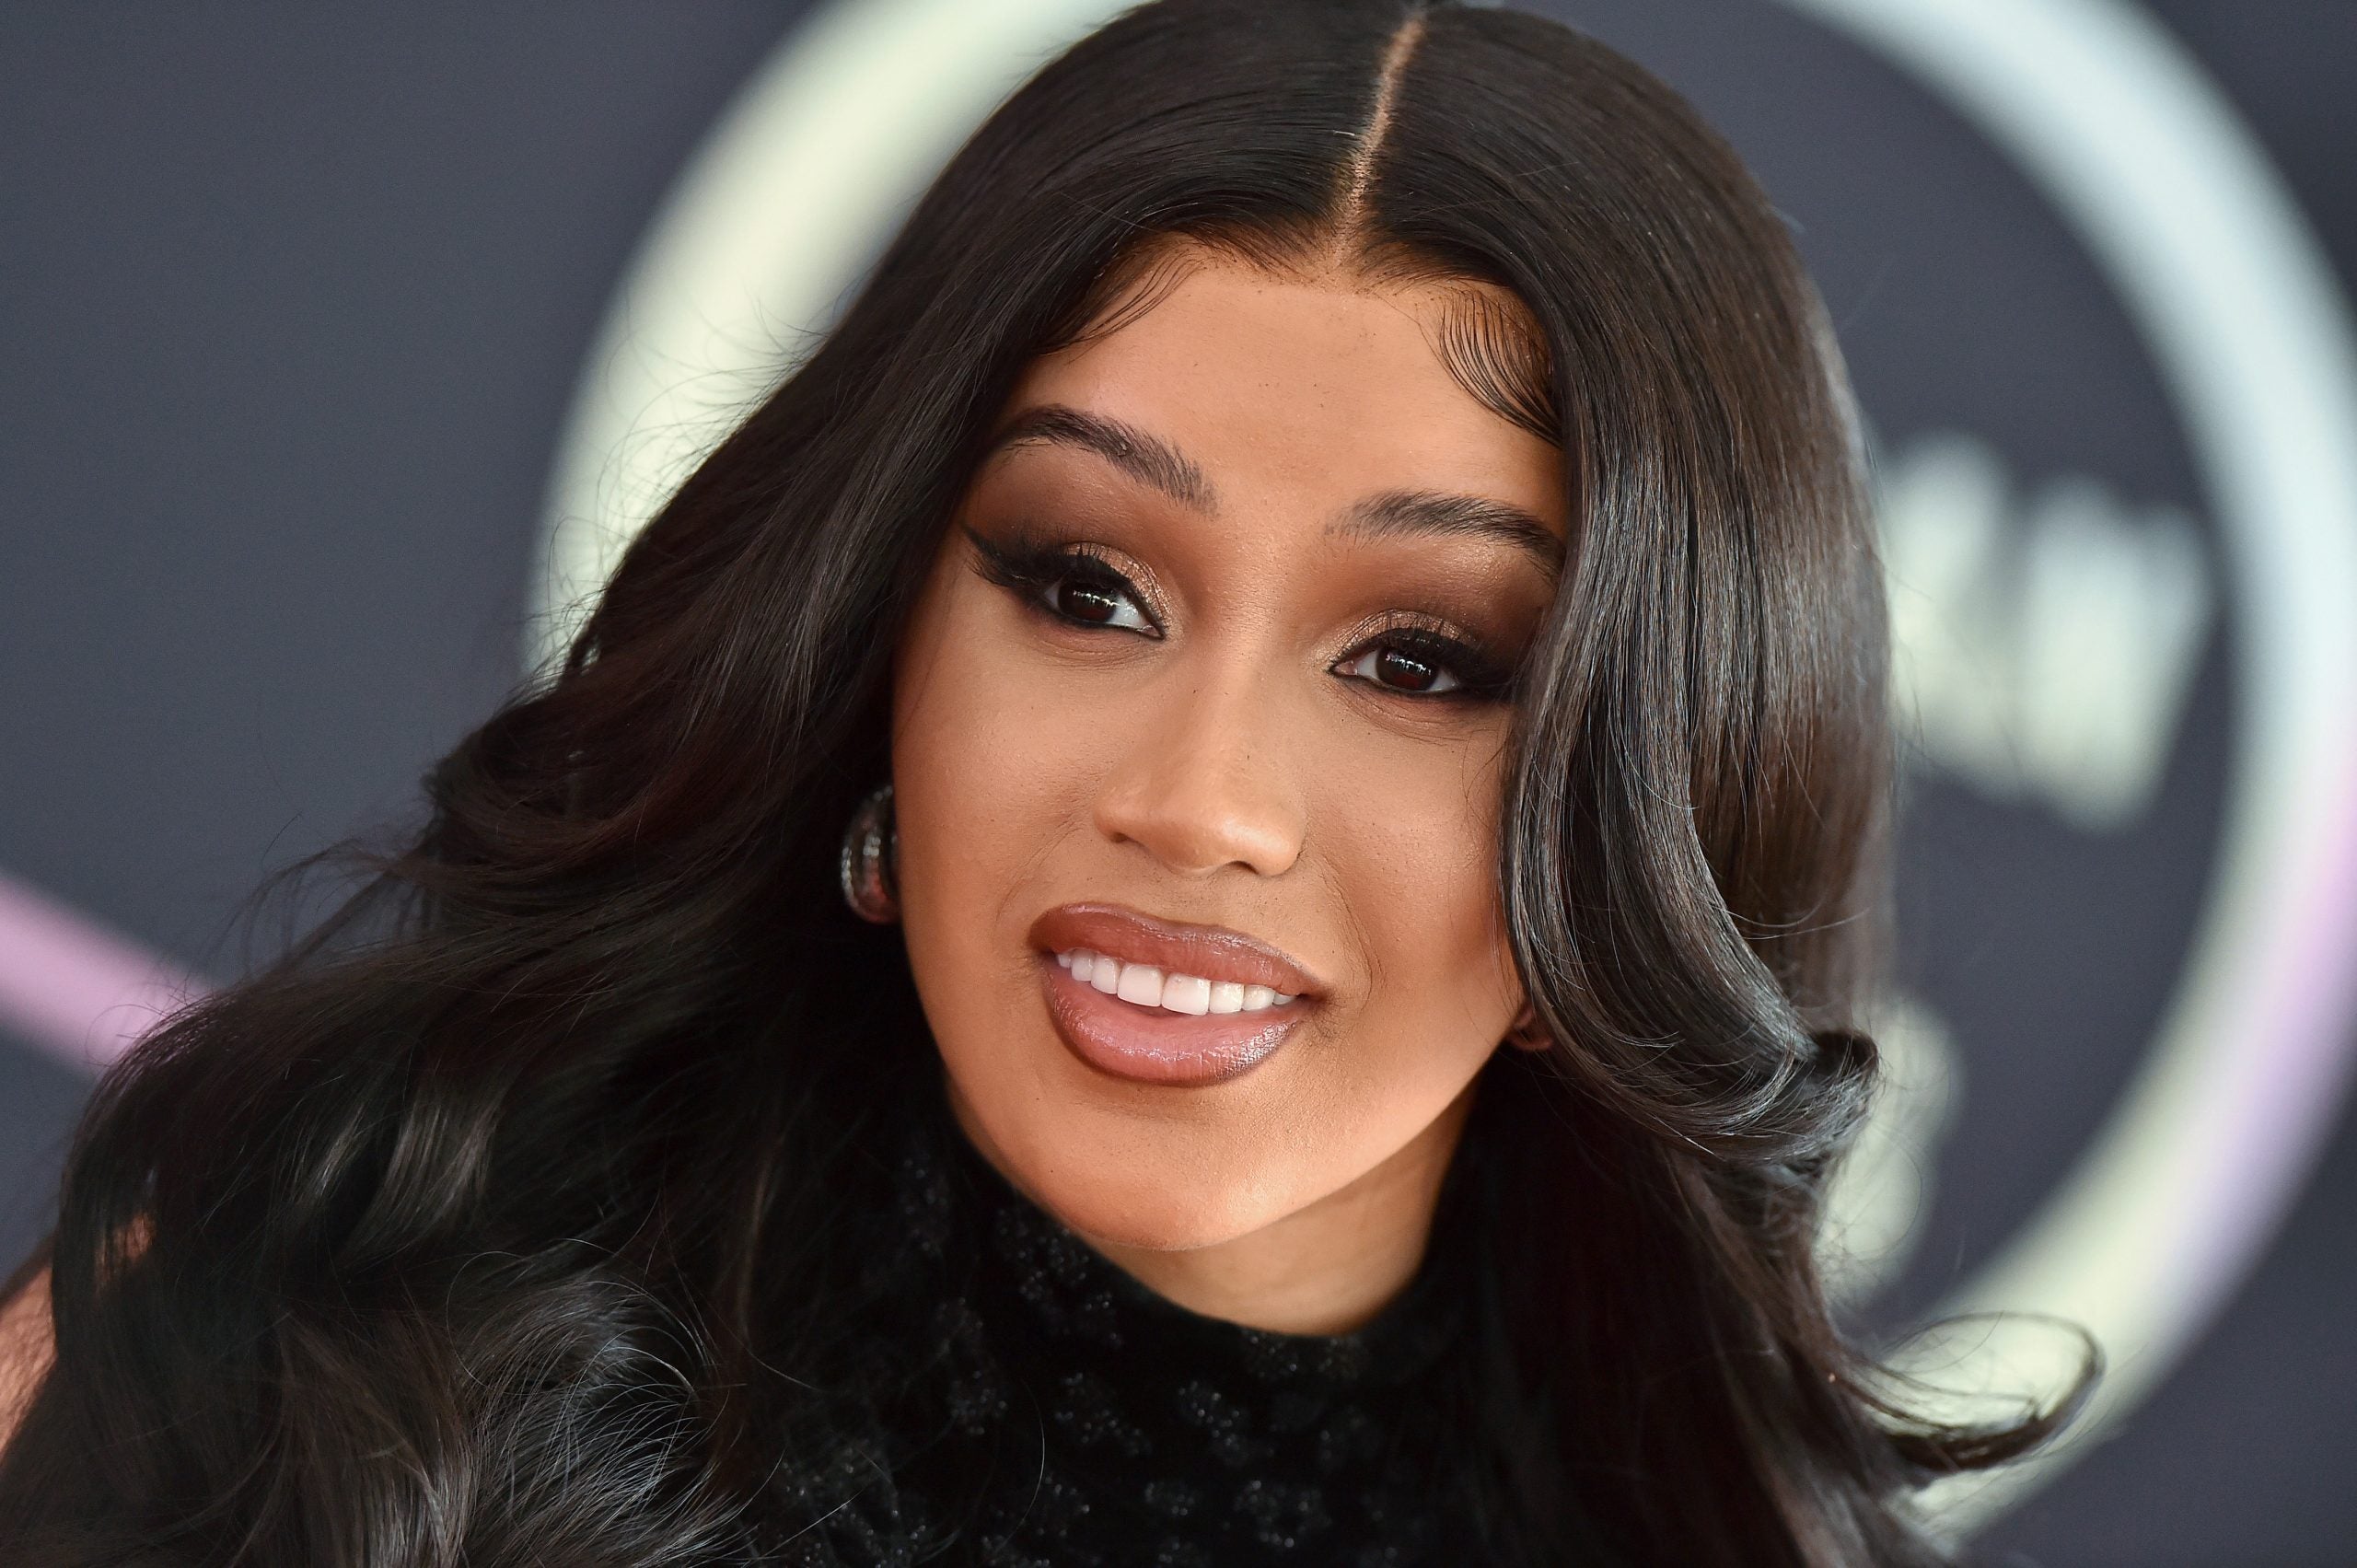 Cardi B Says She May Be Getting A Tattoo On Her Face